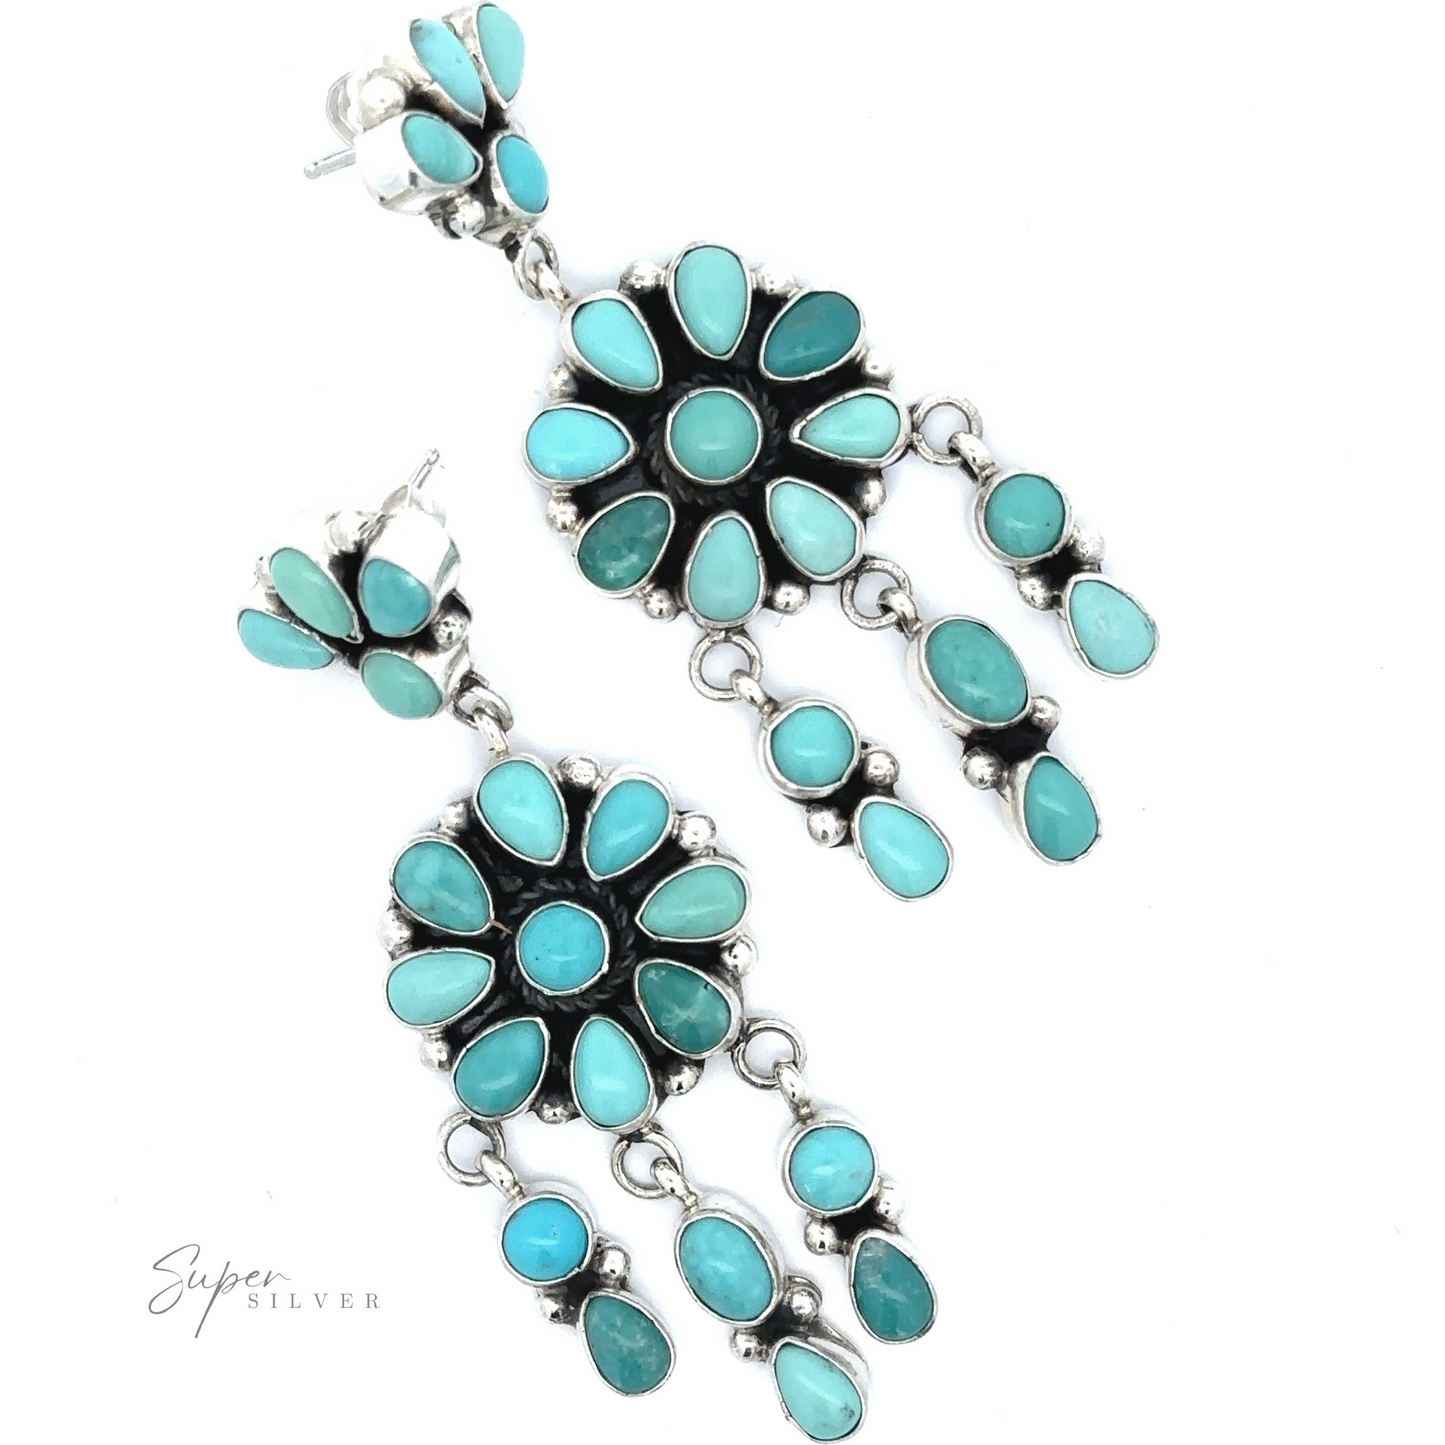 A pair of Native American Turquoise Flower Earrings isolated on a white background.